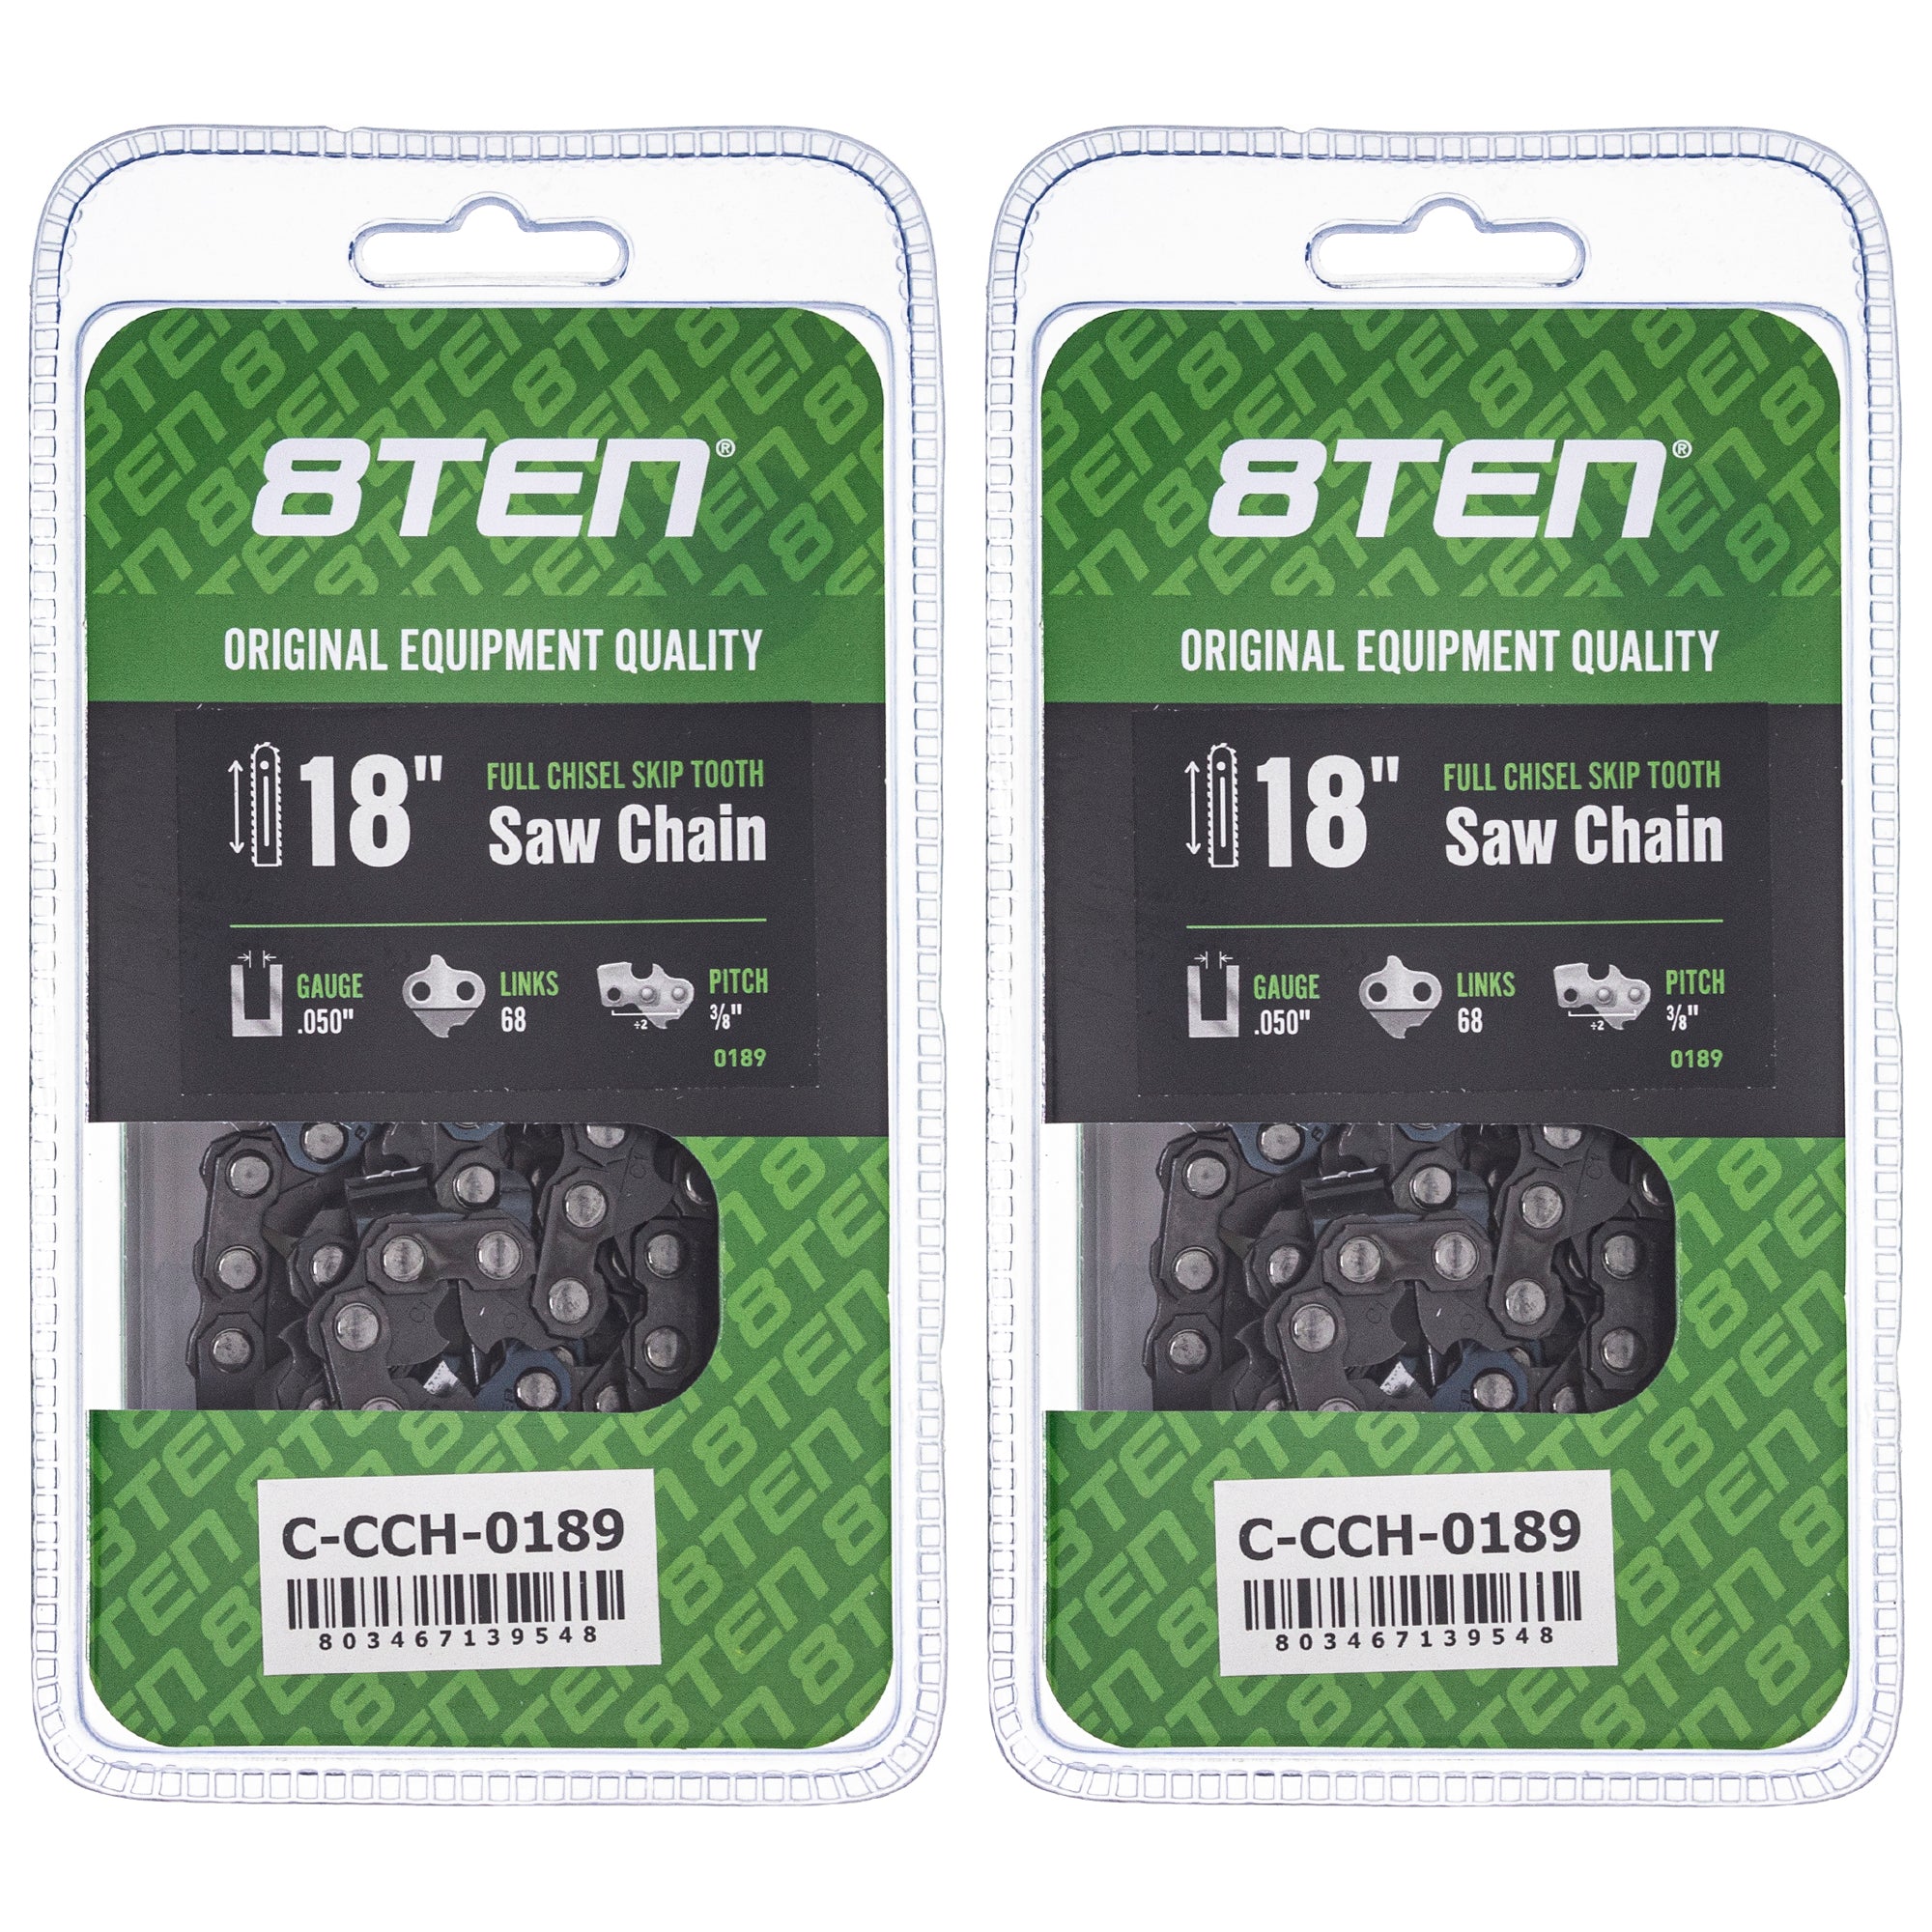 Chainsaw Chain 18 Inch .050 3/8 68DL 2-Pack for zOTHER Stens Ref No Oregon Husqvarna 8TEN 810-CCC2301H